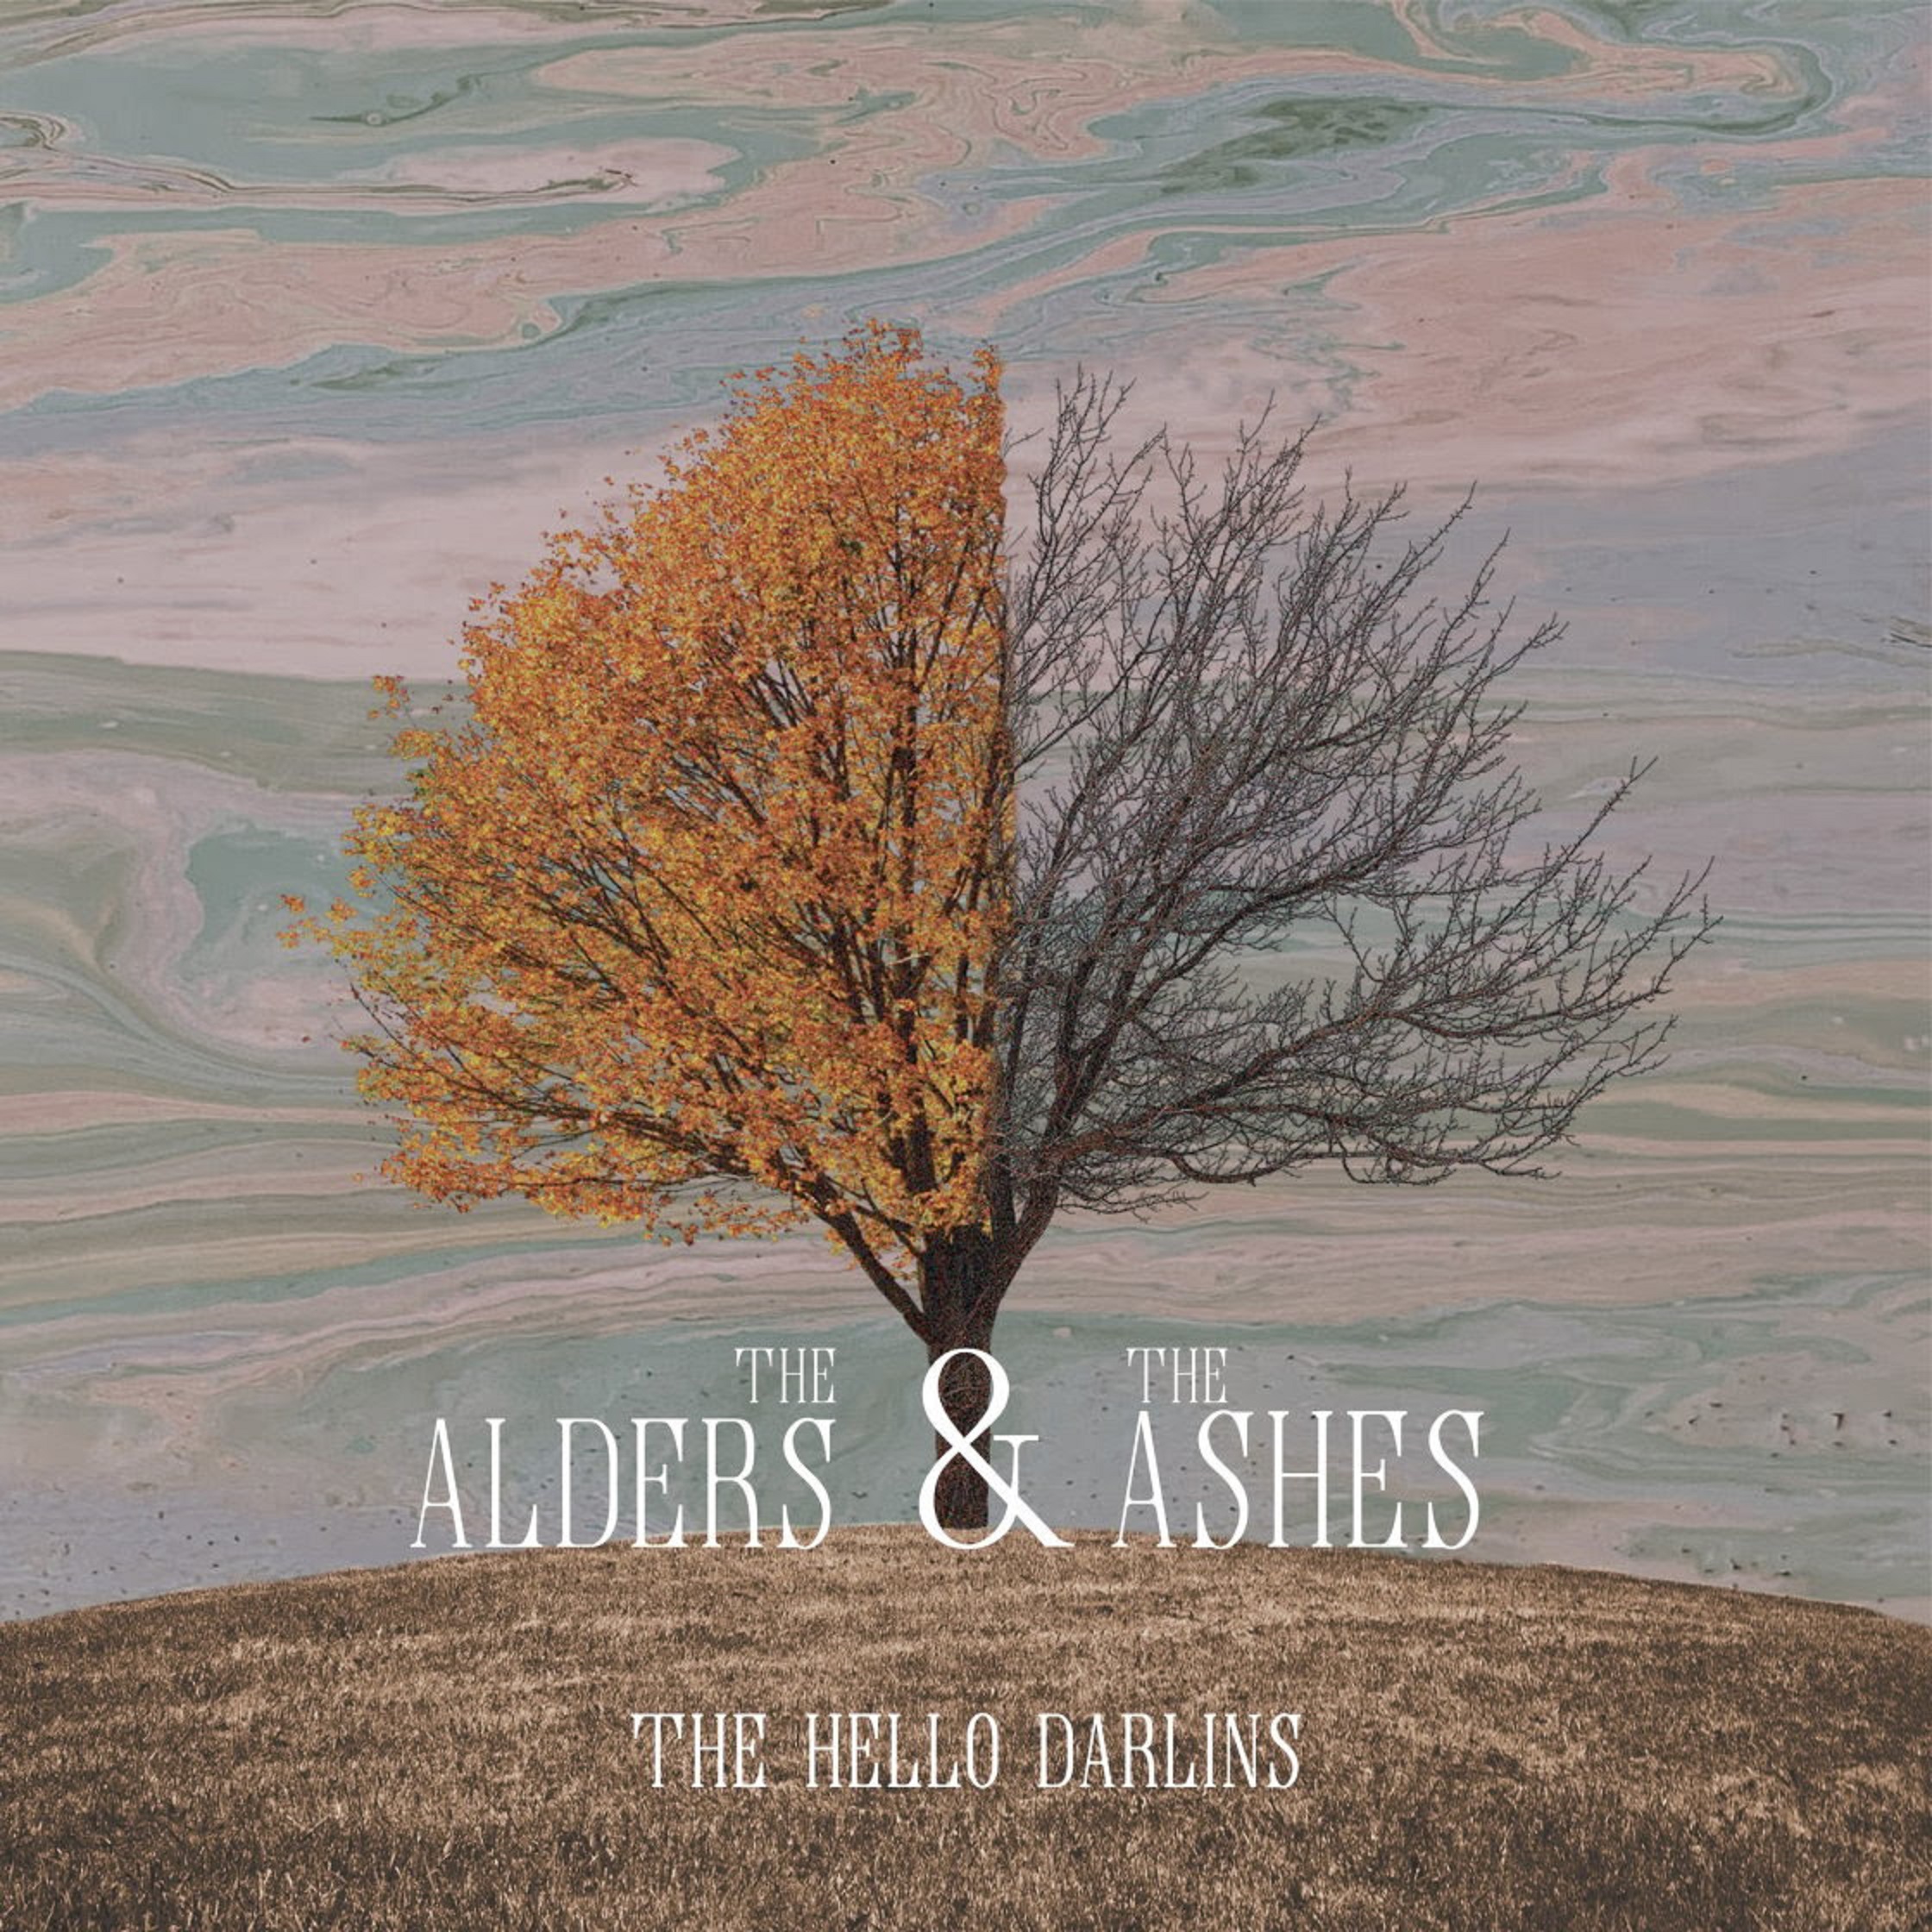 THE HELLO DARLINS release ambitious sophomore album The Alders & The Ashes